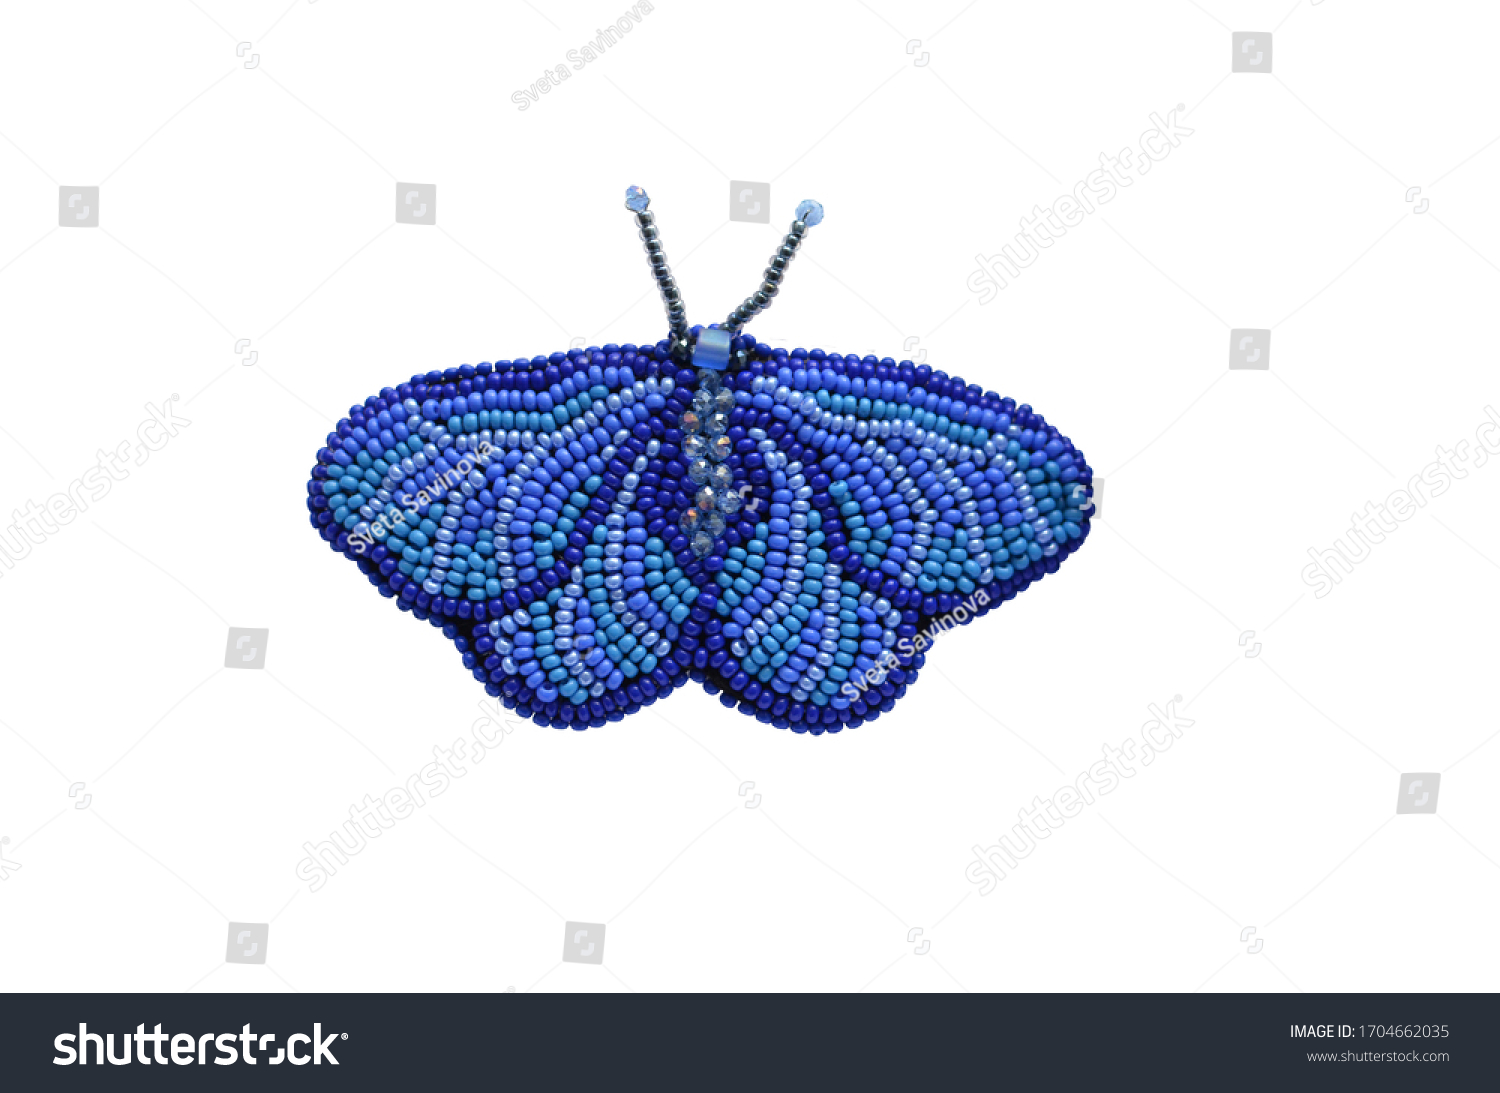 Spring fashion accessory brooch, isolated on white, can be used to print on clothes. Blue moth or butterfly with antennae, shiny beads, fashion item #1704662035